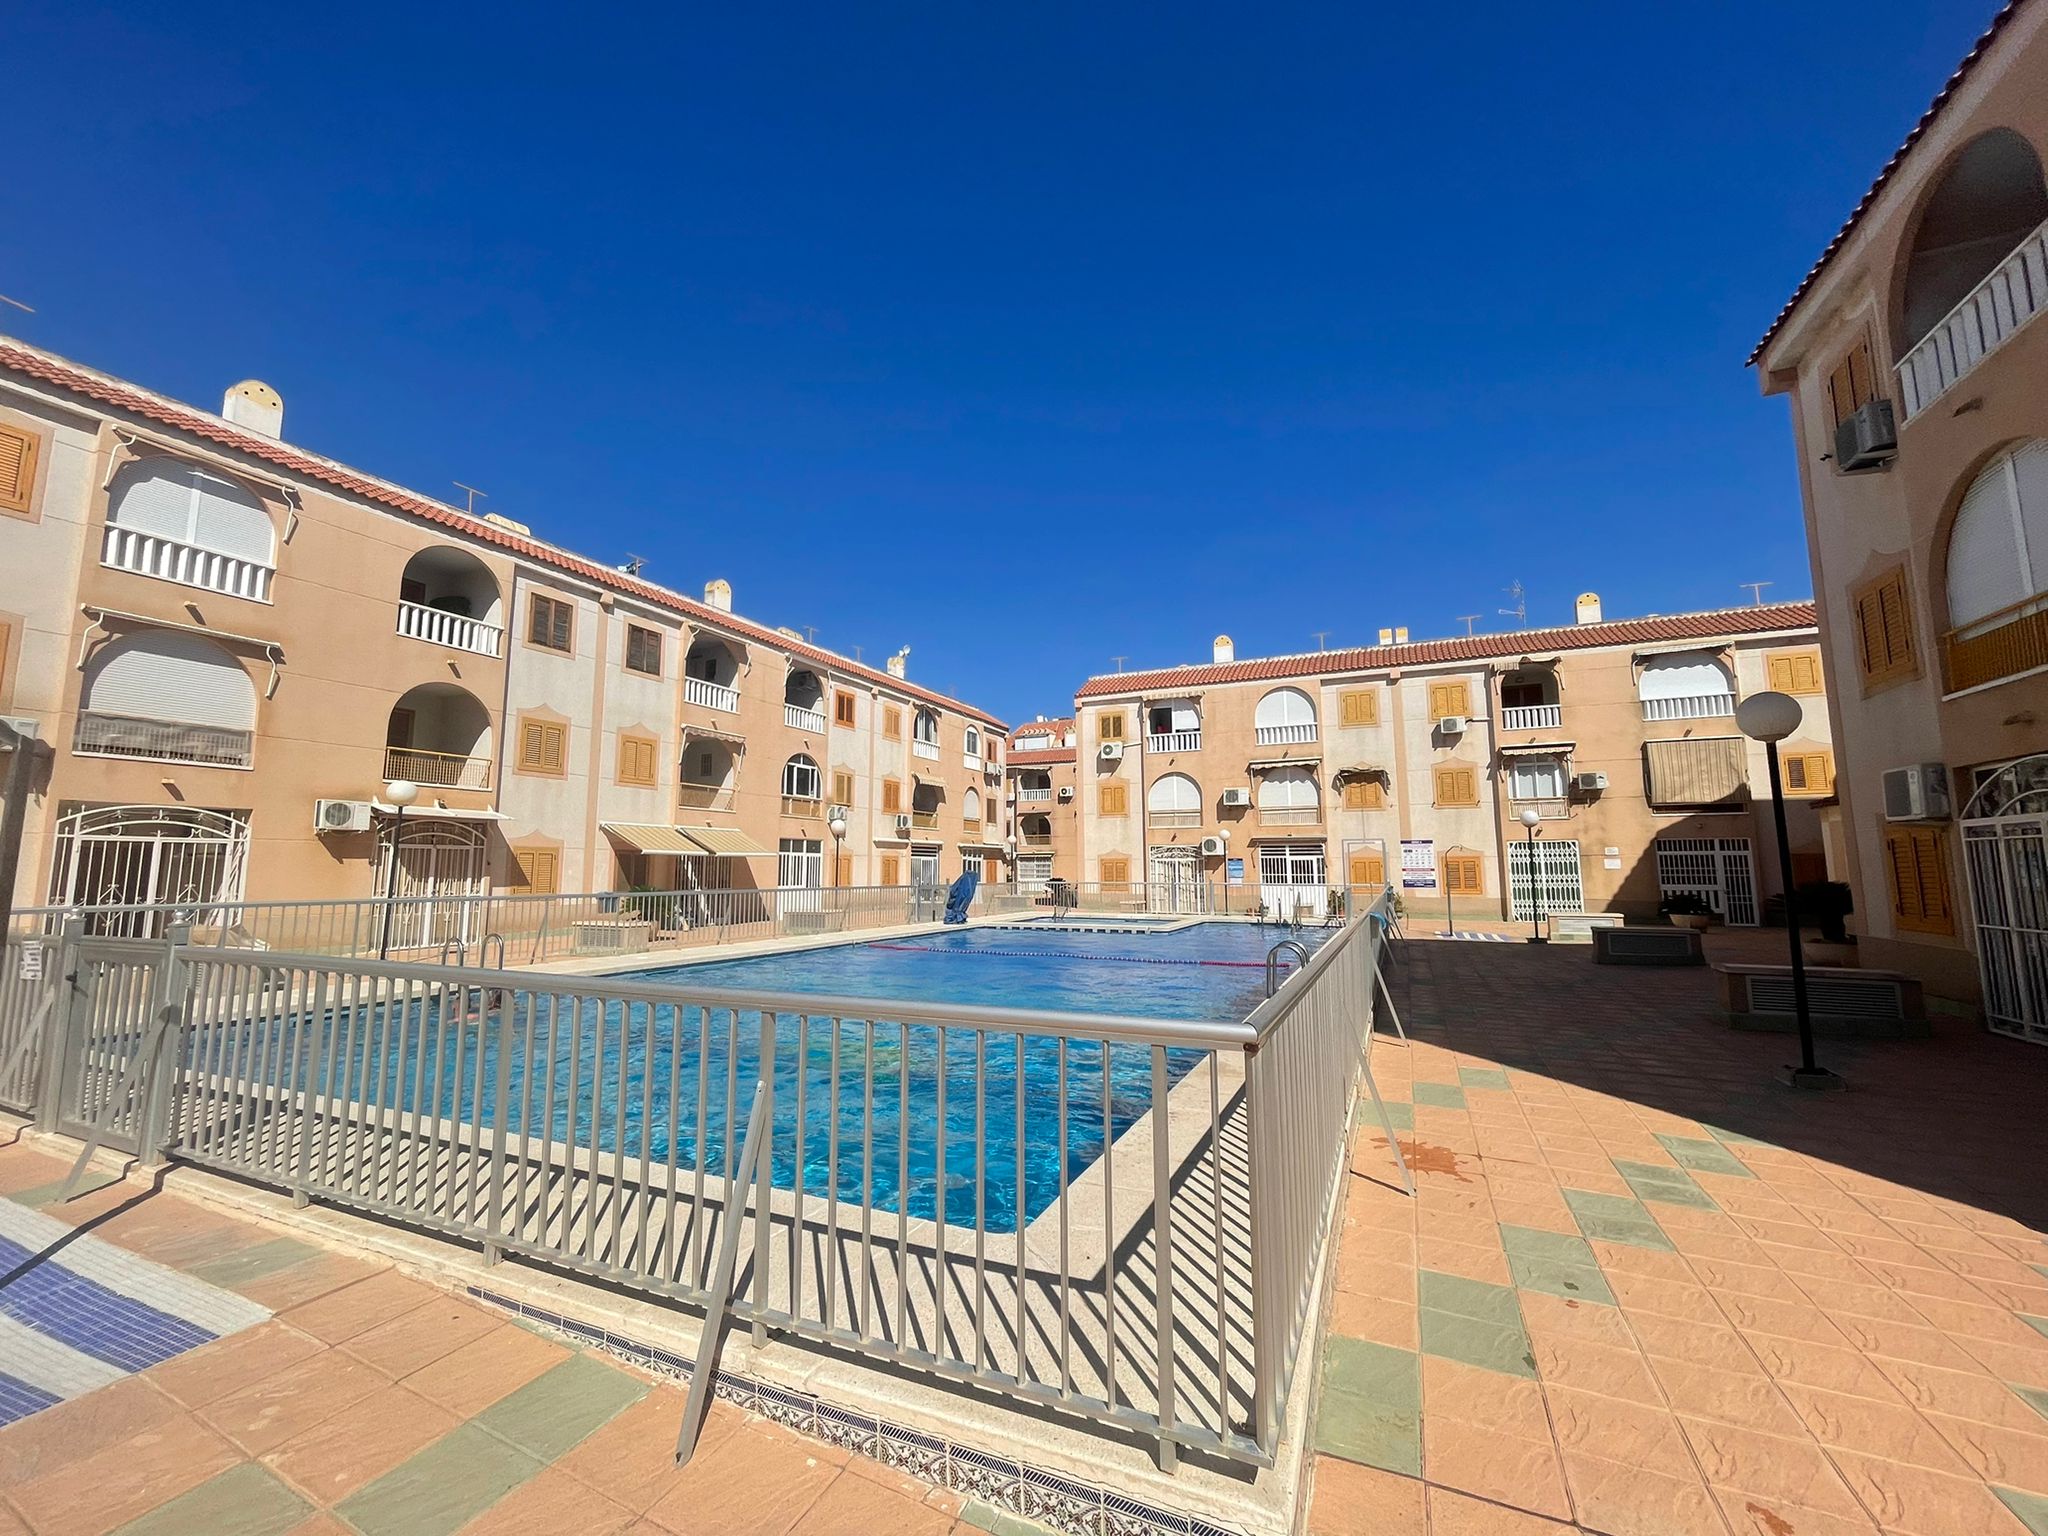 Apartment for sale 300m from Acequión beach in Torrevieja.